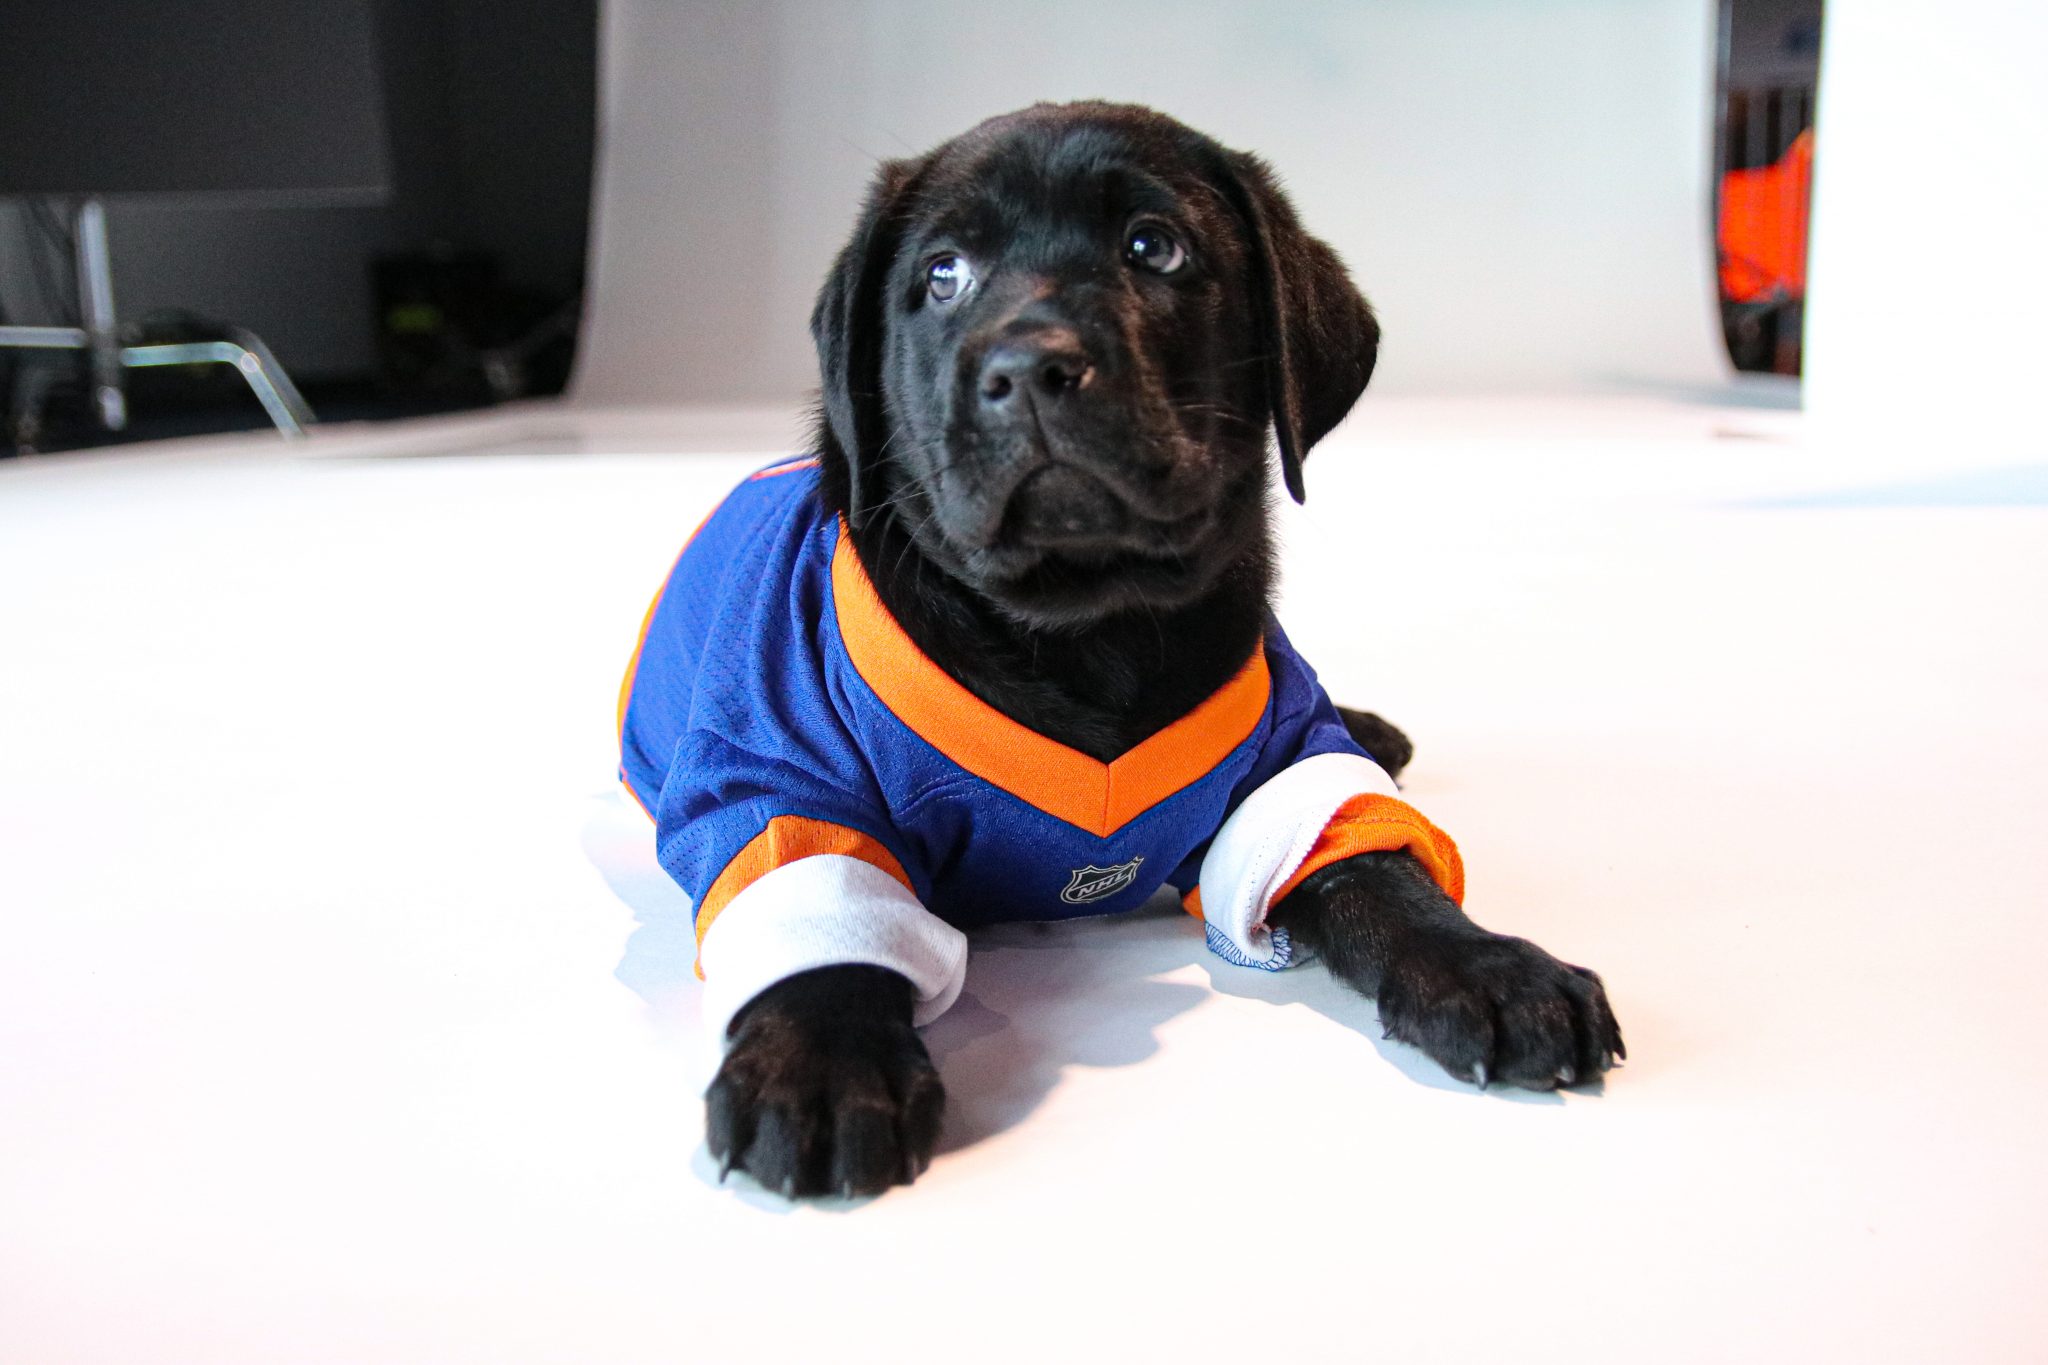 The New York Islanders need help naming their new service puppy